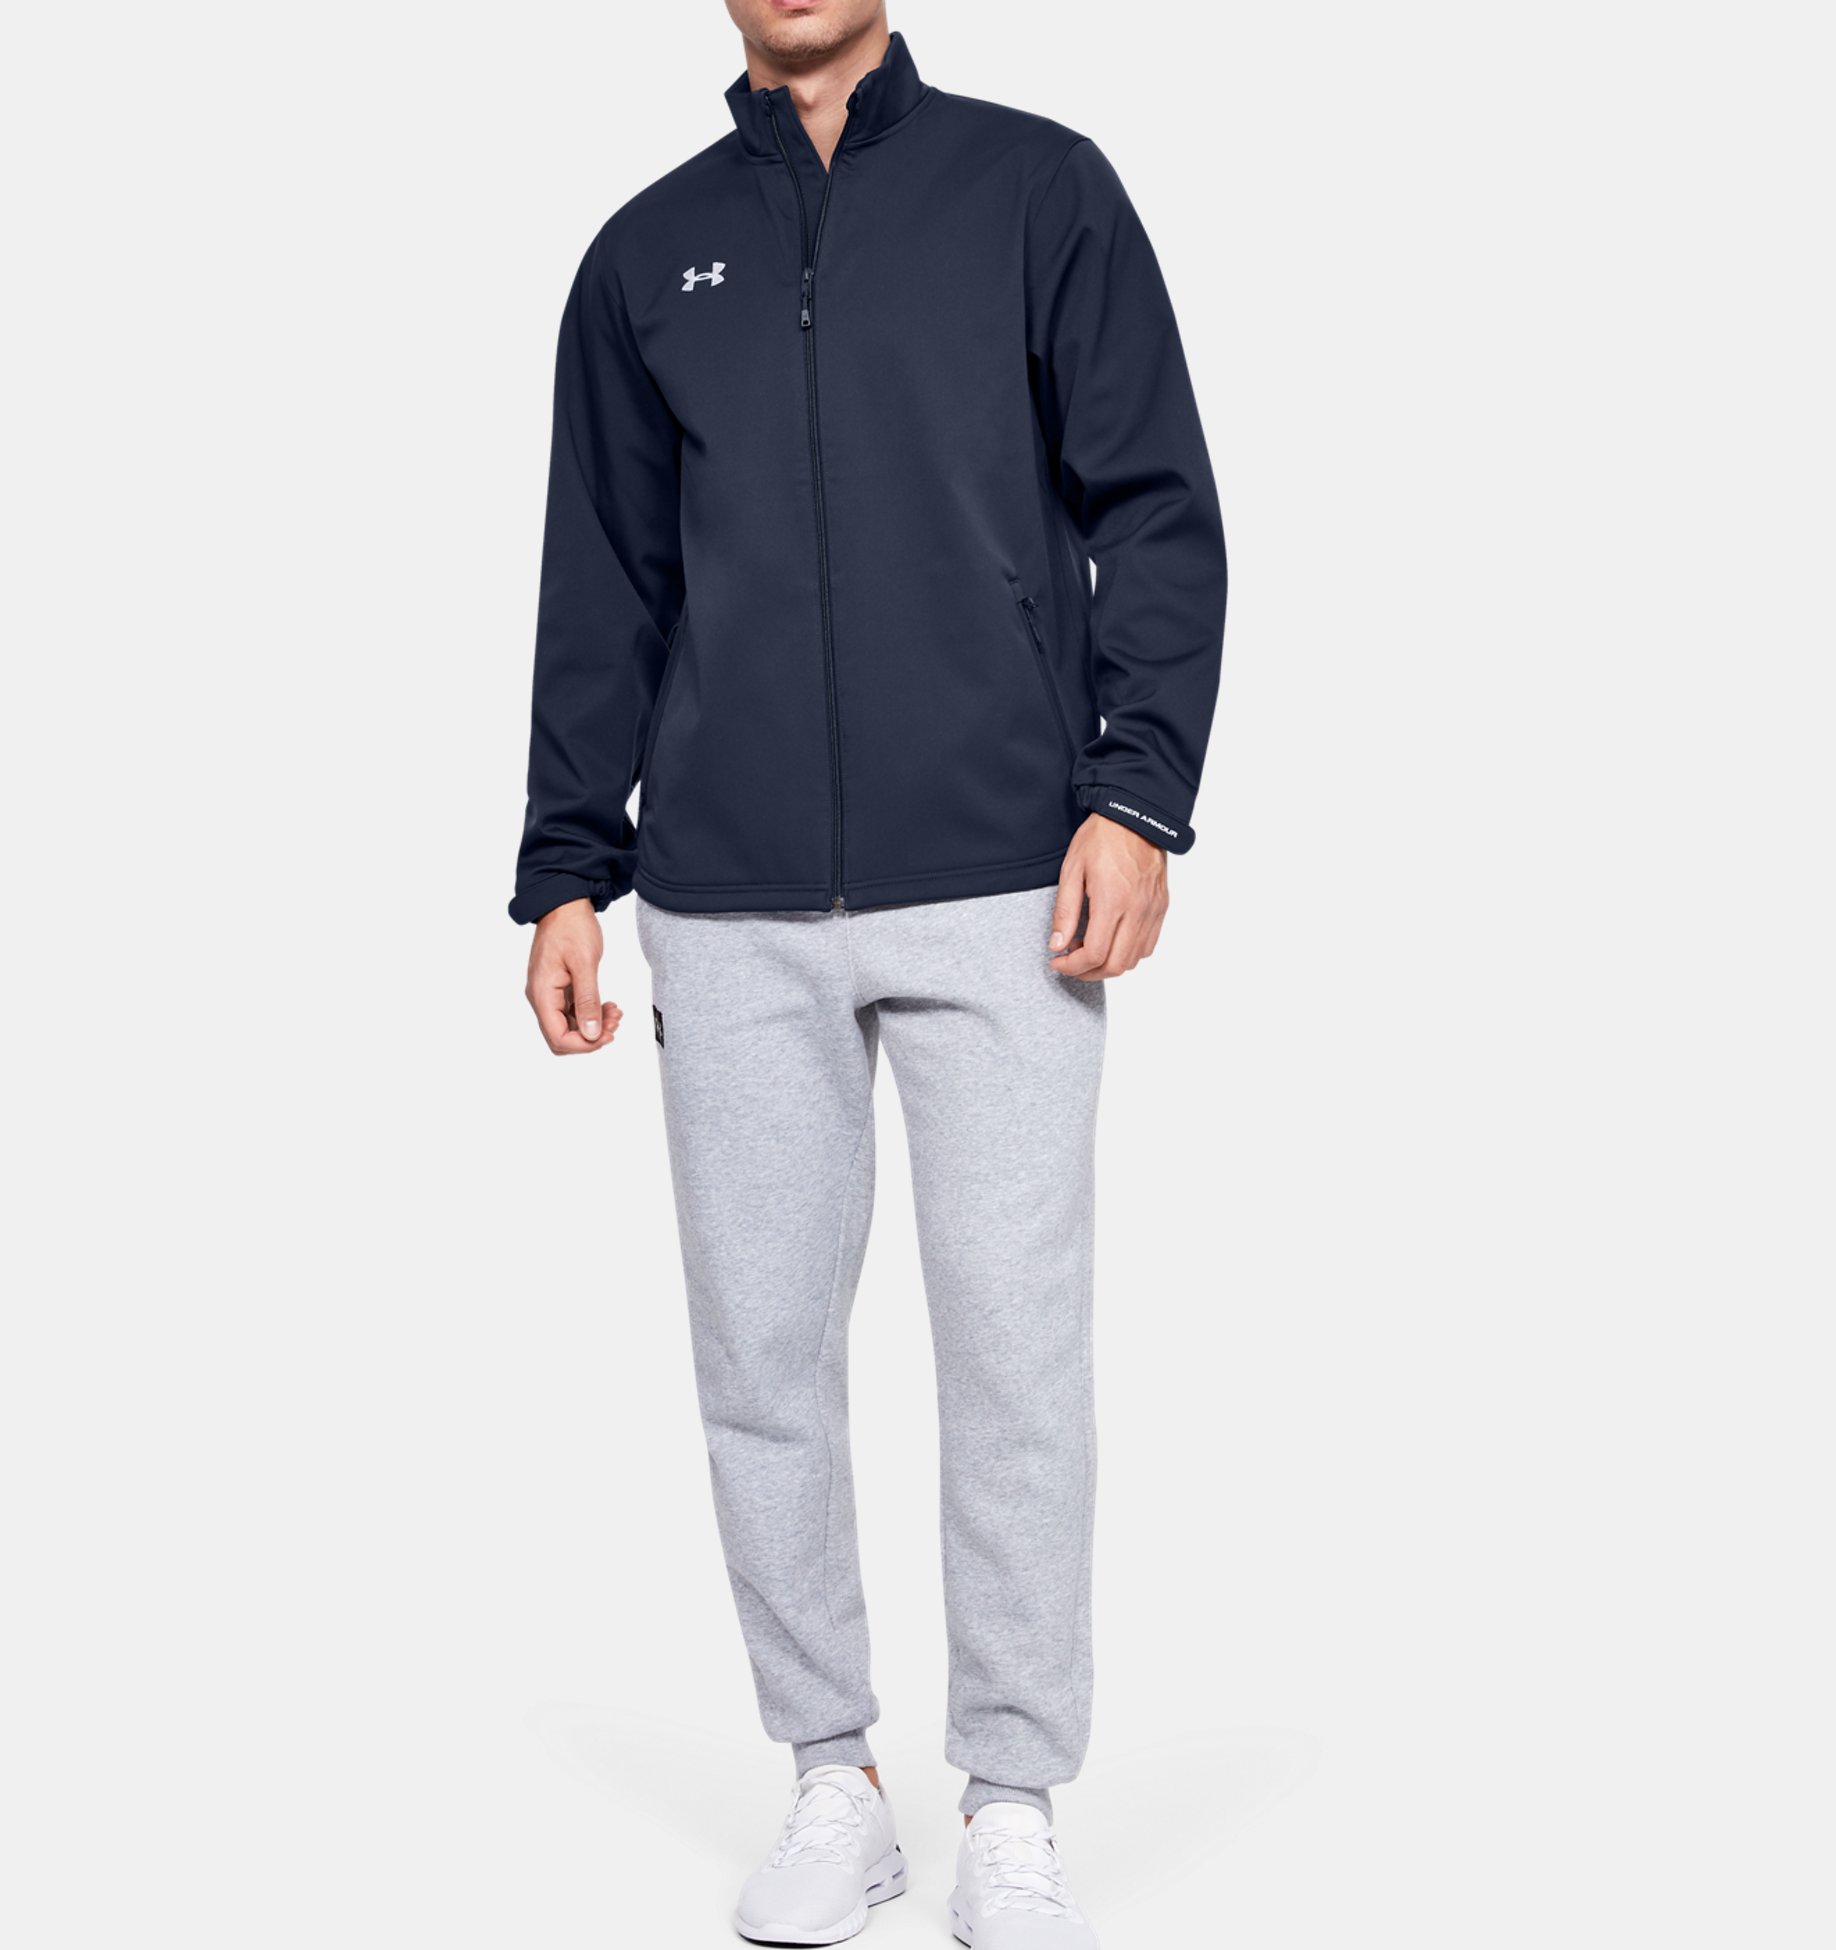 Under Armour Men's Fc Softshell Athletic-Soft-Shell-Jackets 